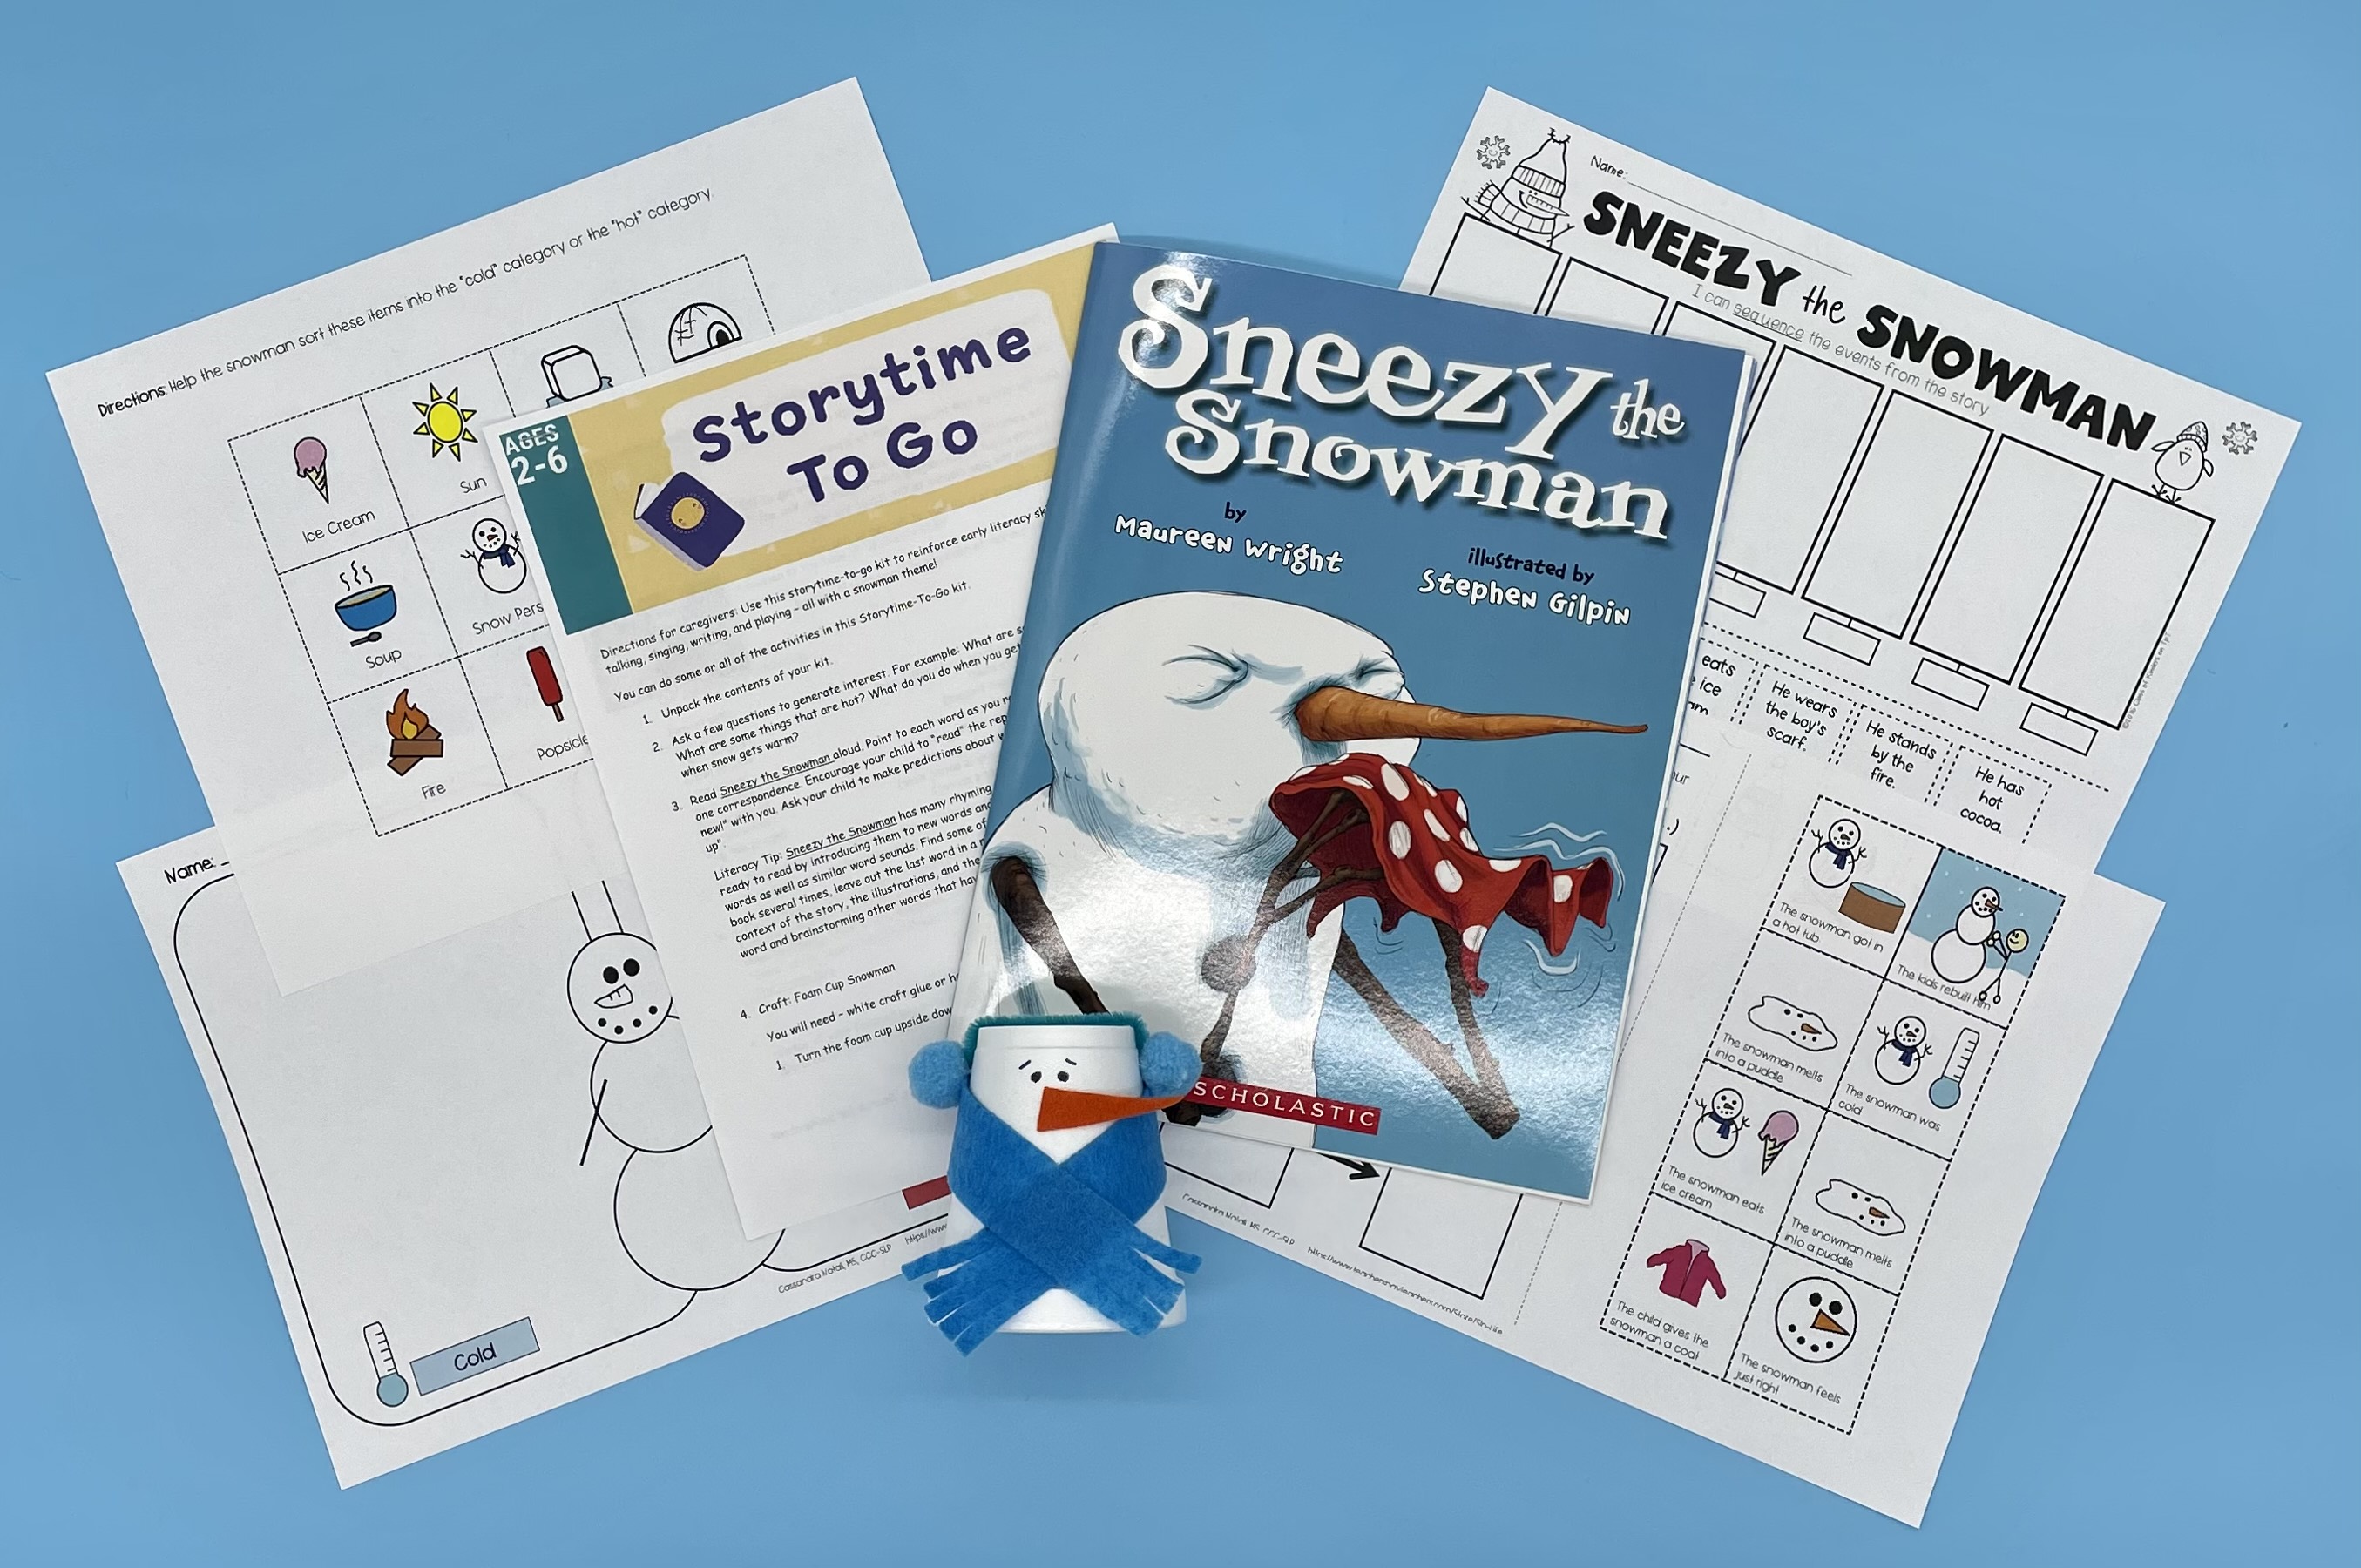 Sneezy the Snowman story time to go image